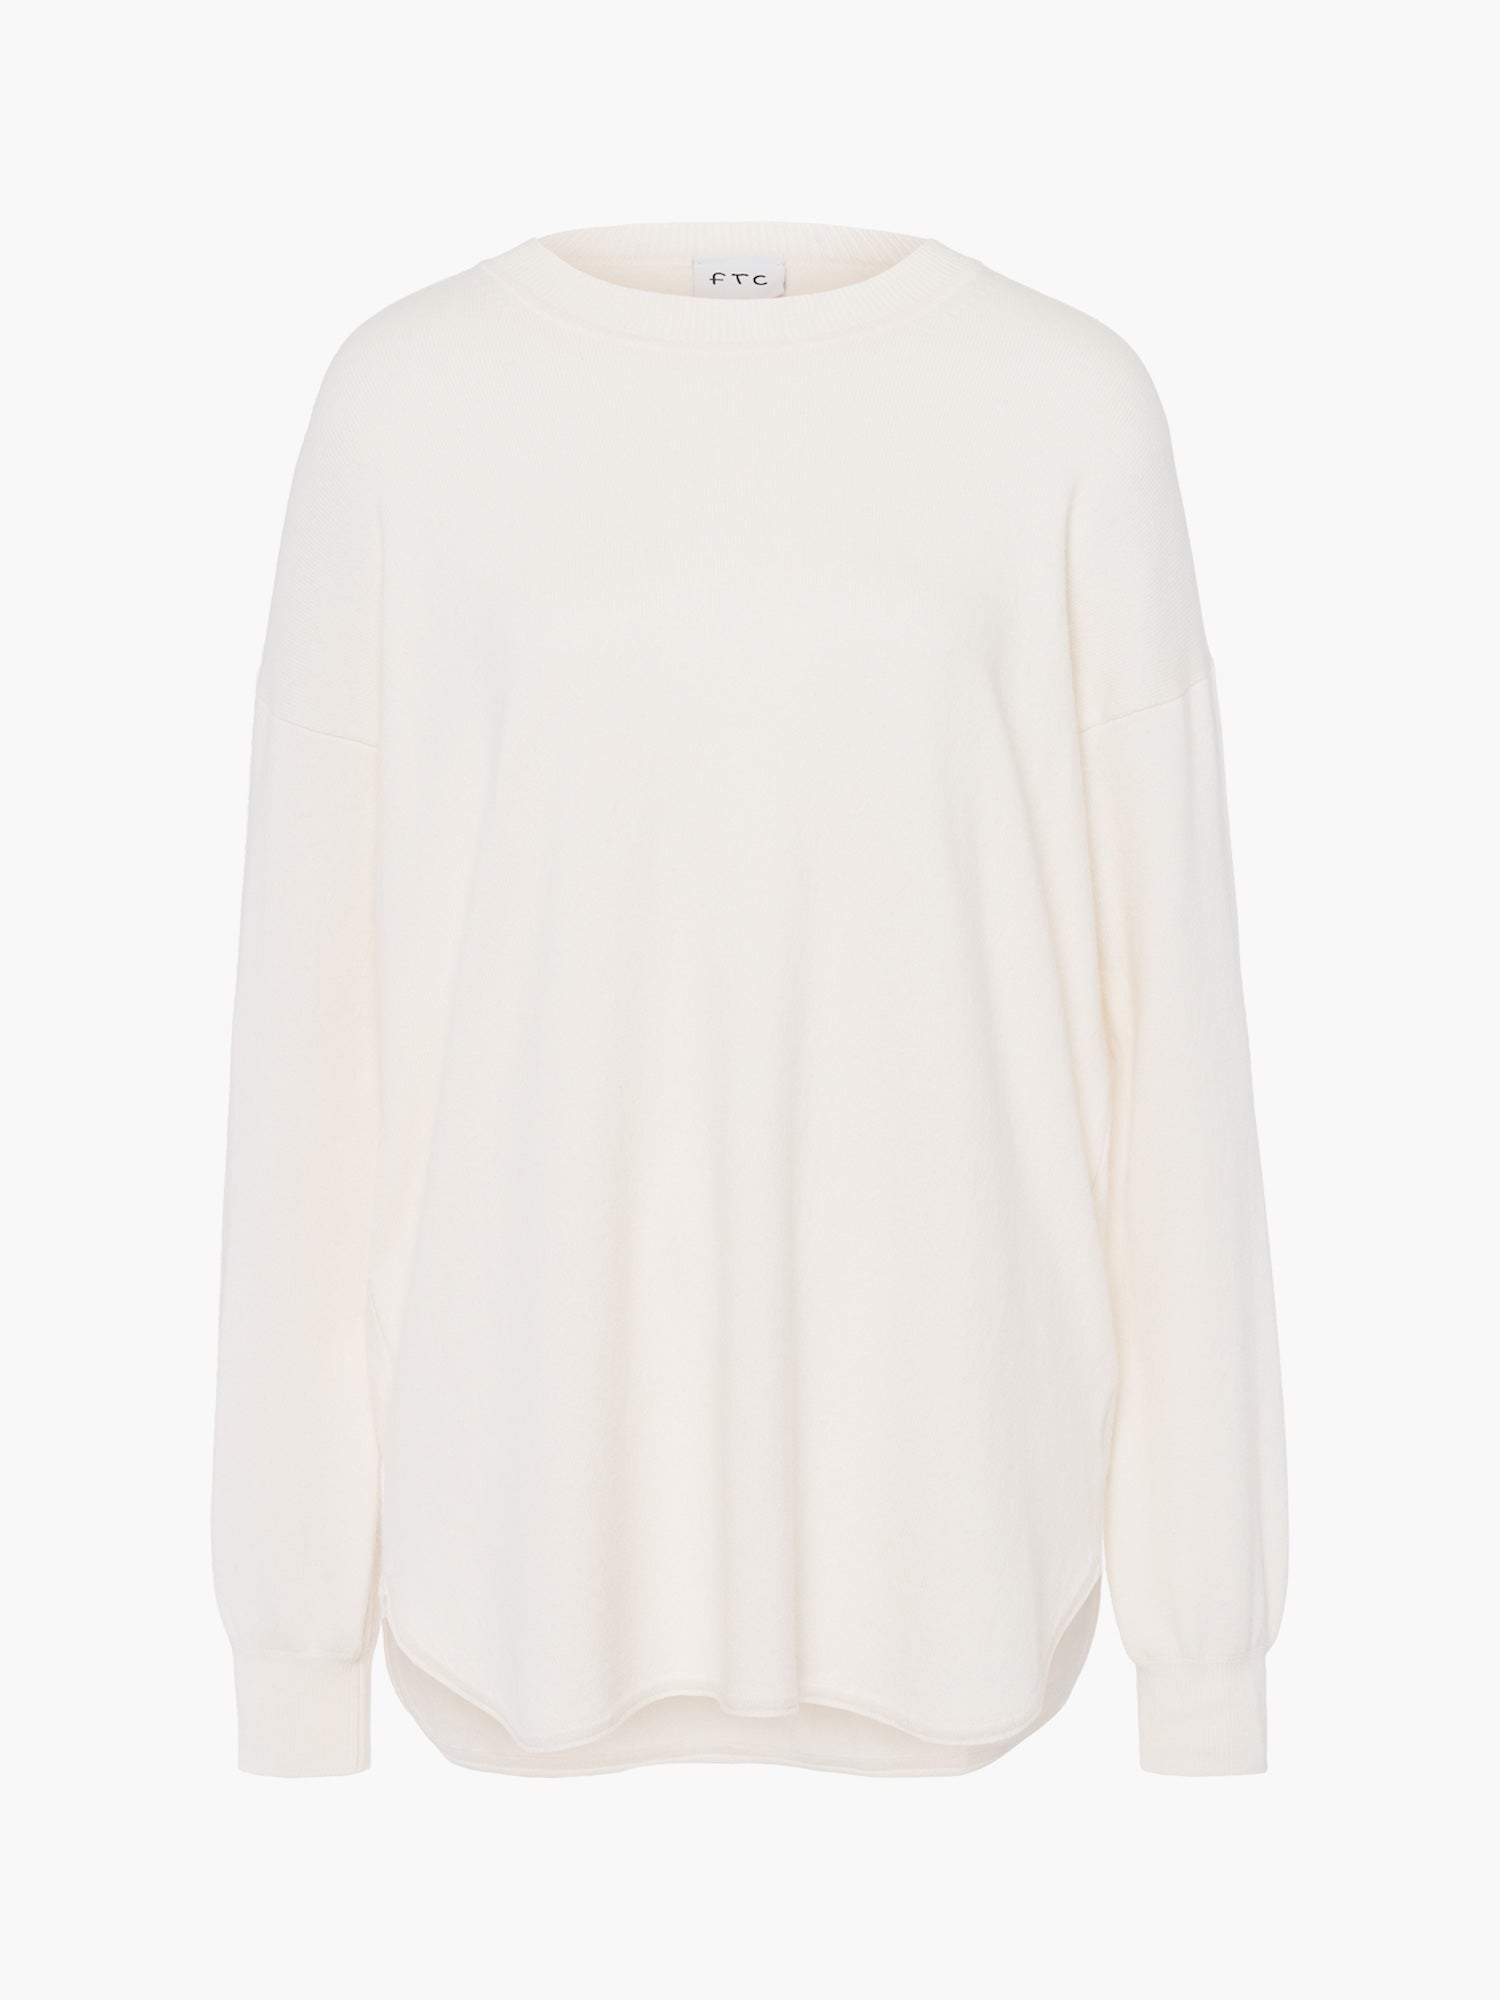 FTC-Cashmere-OUTLET-SALE-Pullover-RN-Strick-ARCHIVE-COLLECTION_3fd0b642-ce0a-4225-8e83-6a3546ac43a9.jpg